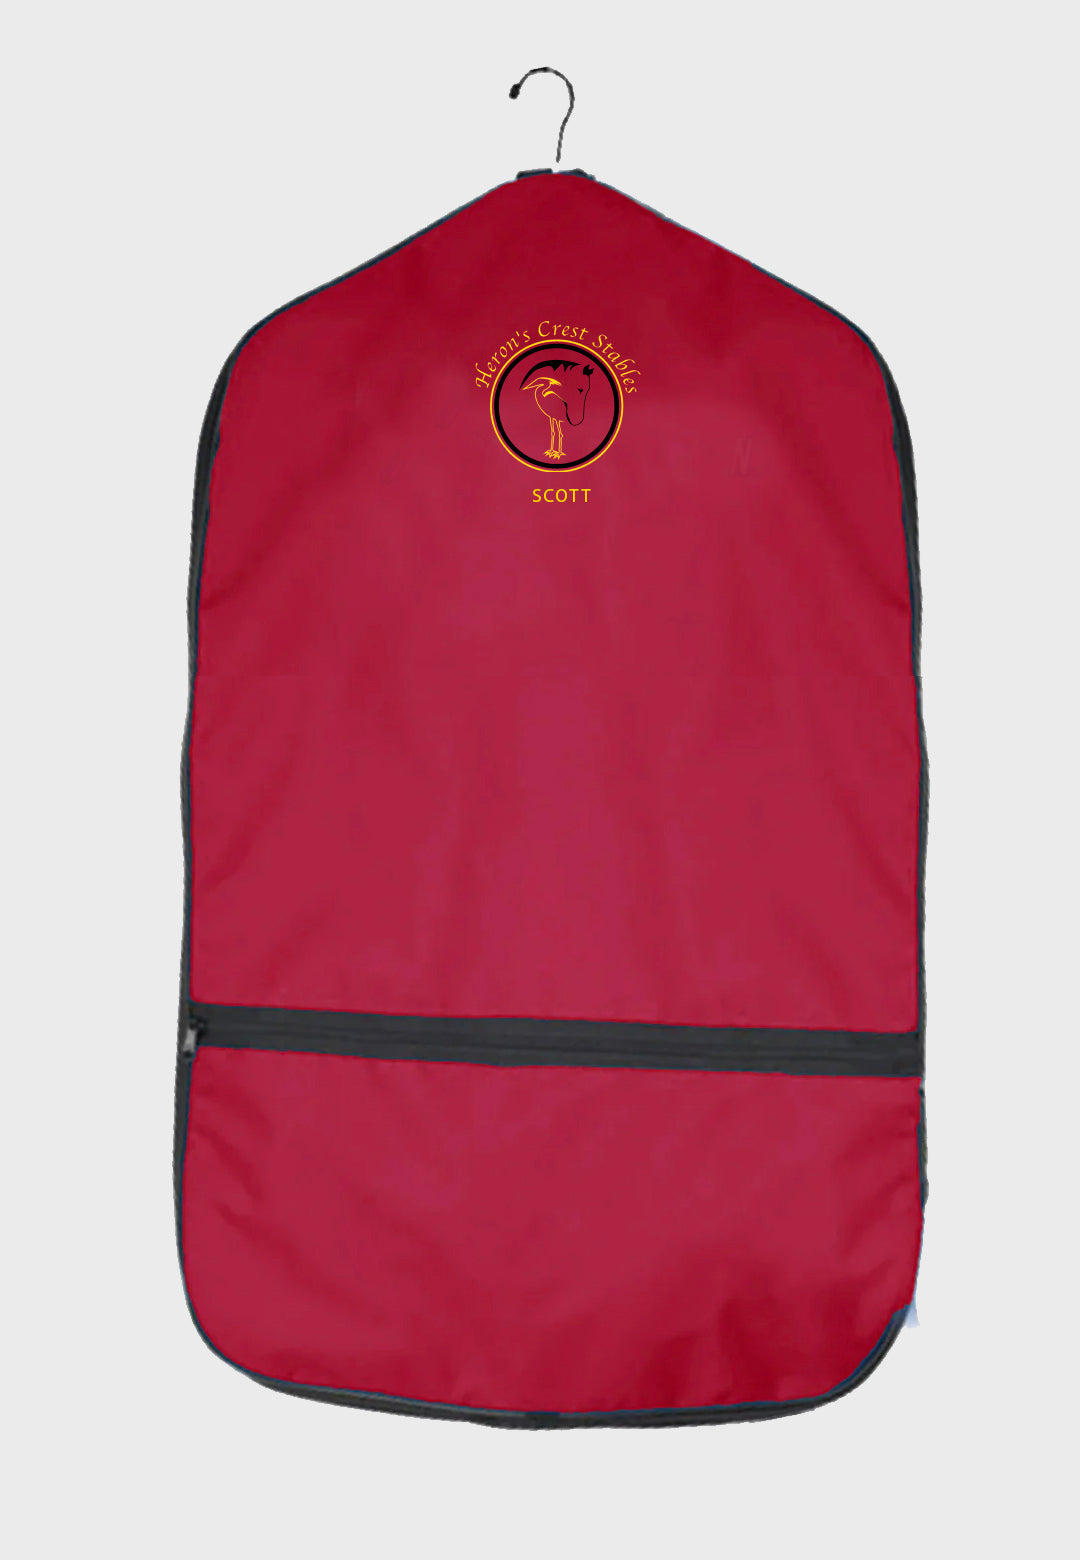 Heron's Crest Stables World Class Equine Red Garment Bag - Original and XL